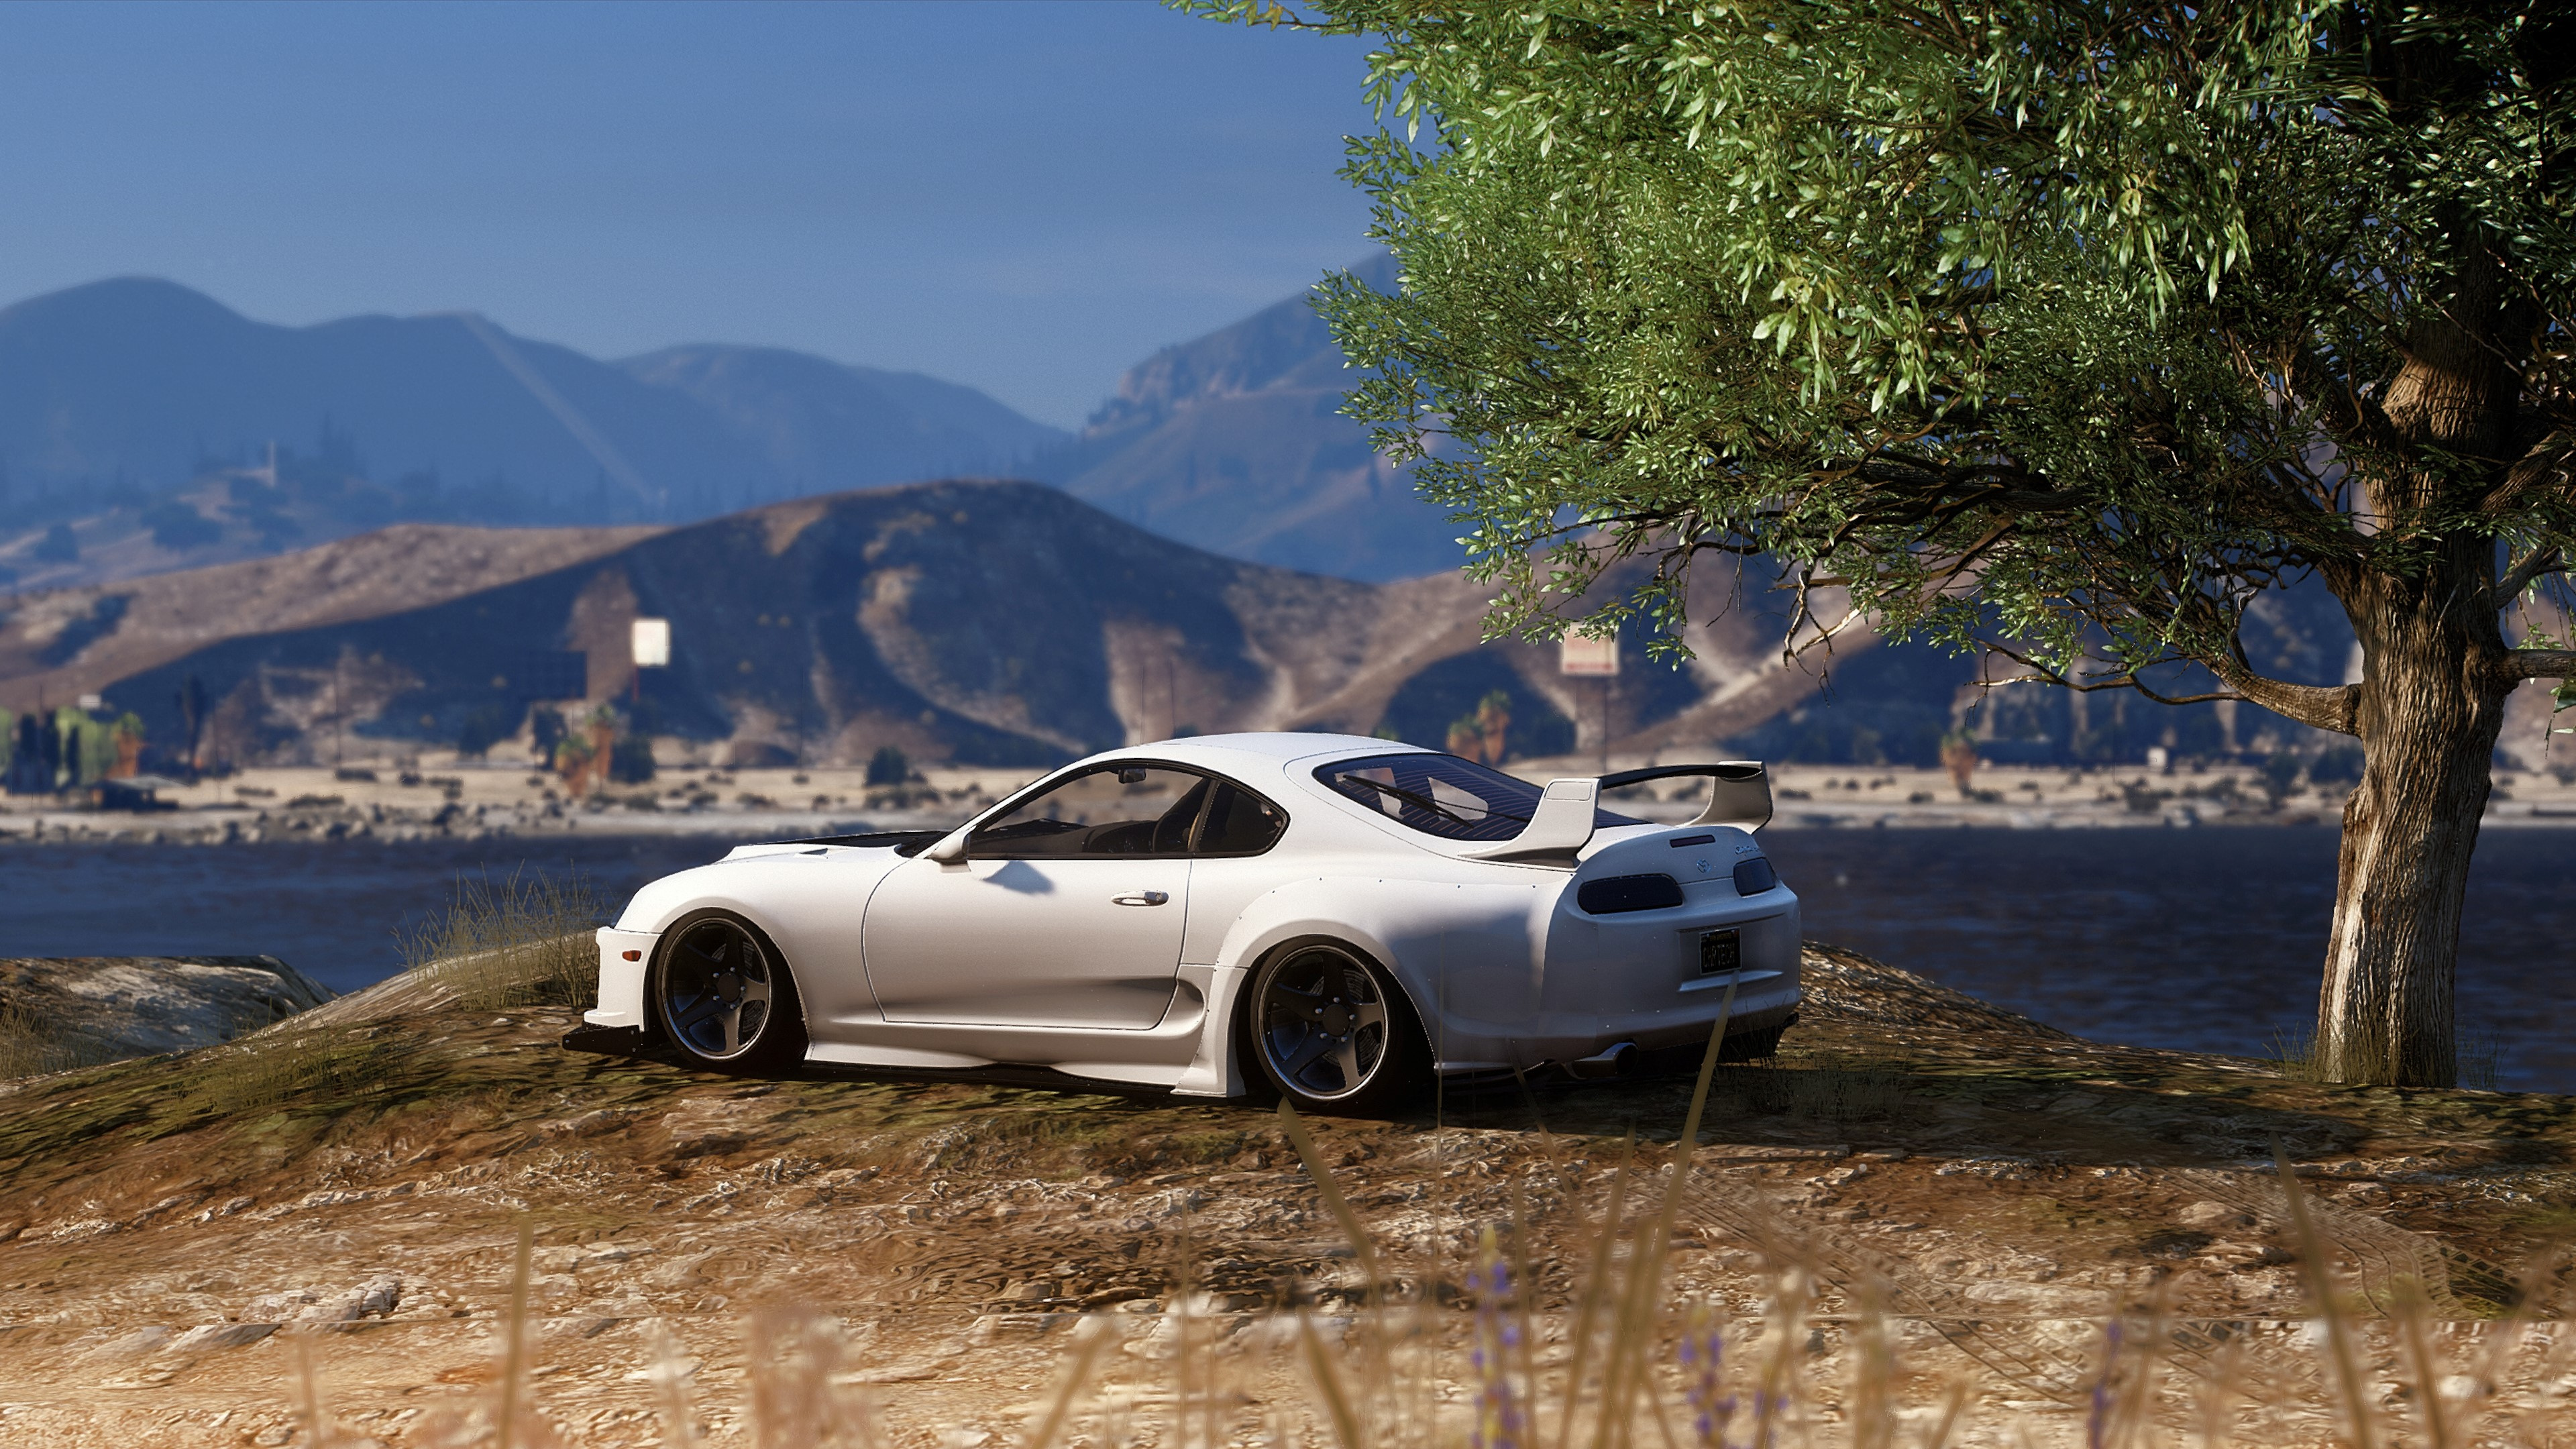 The Crew 2 GAME MOD Crew 2 Payback Reshade v.1.0 - download